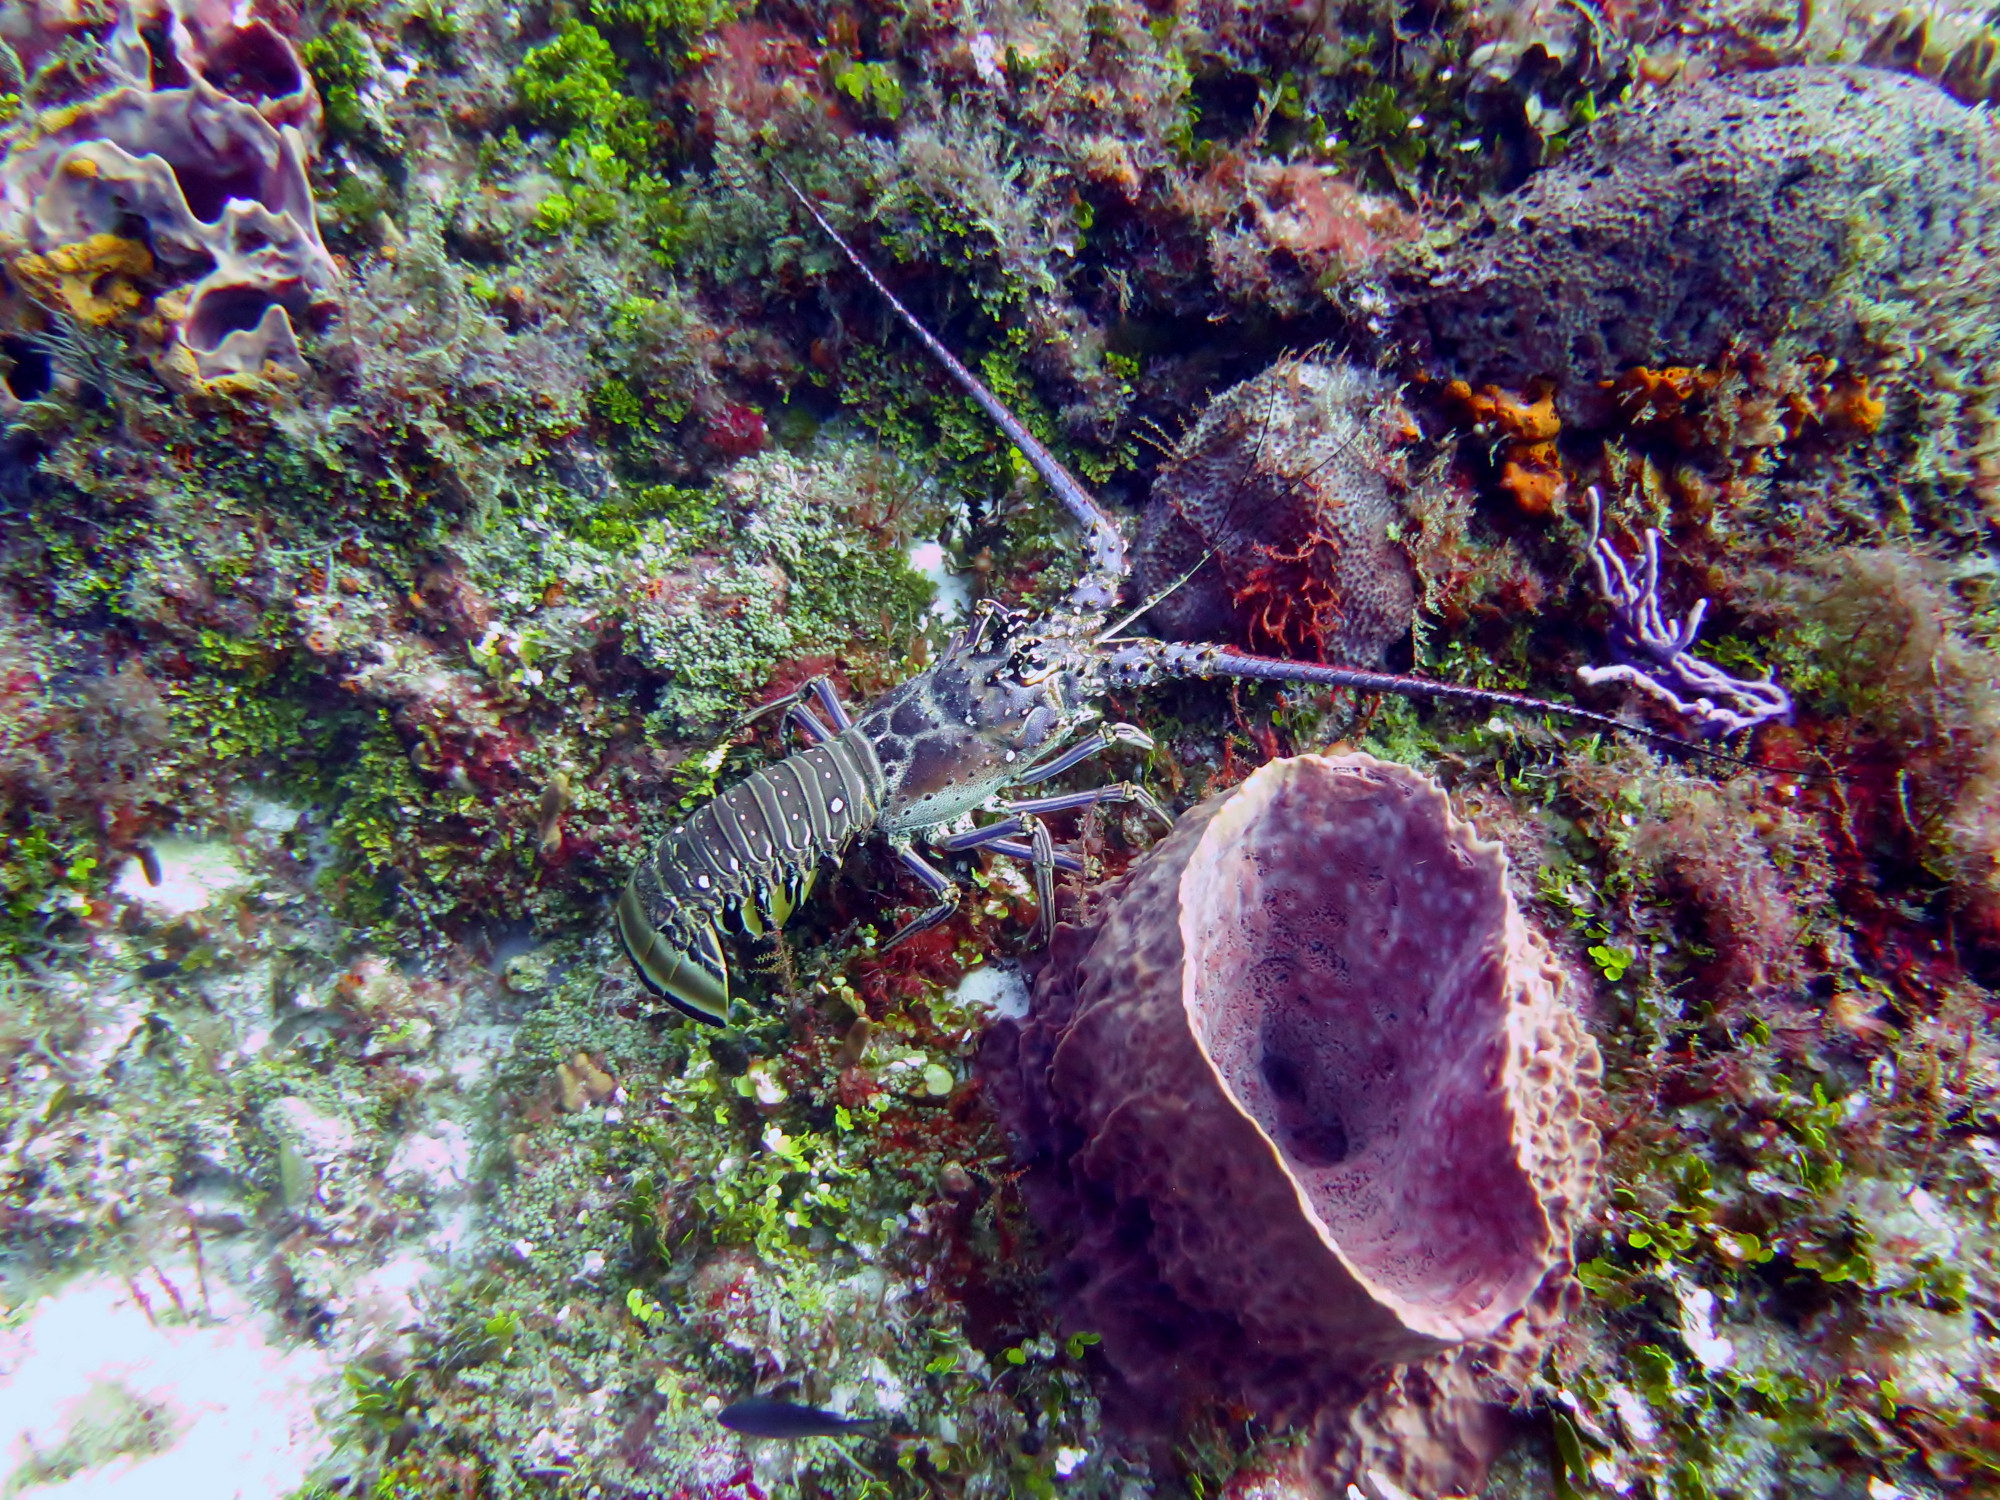 Lobster out and about